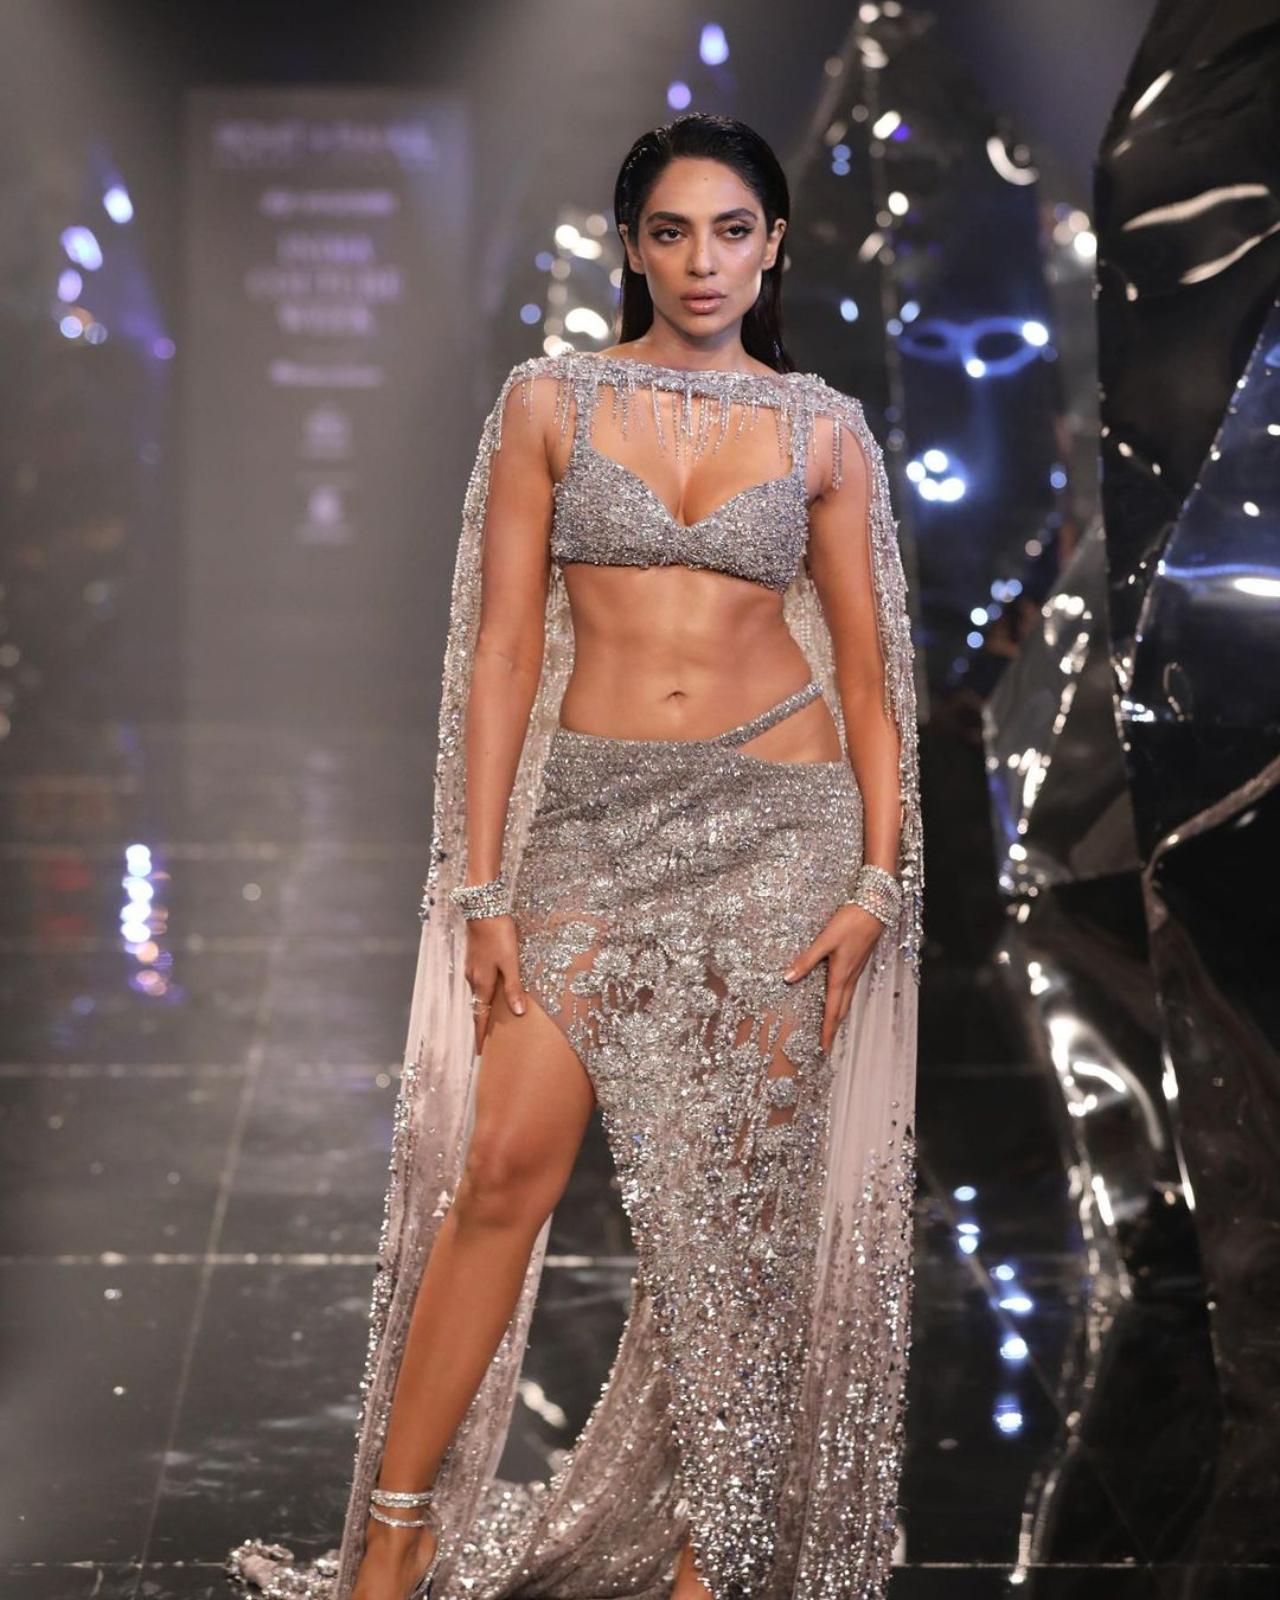 Sobhita Dhulipala dominated the runway in a glamorous, contemporary silver lehenga. Her outfit showcased a sequin-embellished bralette blouse with a midriff-revealing cut and fitted bust, paired with a sequined skirt featuring a sheer overlay, thigh-high slit, and floor-length hem. Her ensemble was gracefully completed with a sheer, tasseled dupatta with sequin embroidery, lending a refined touch to her look